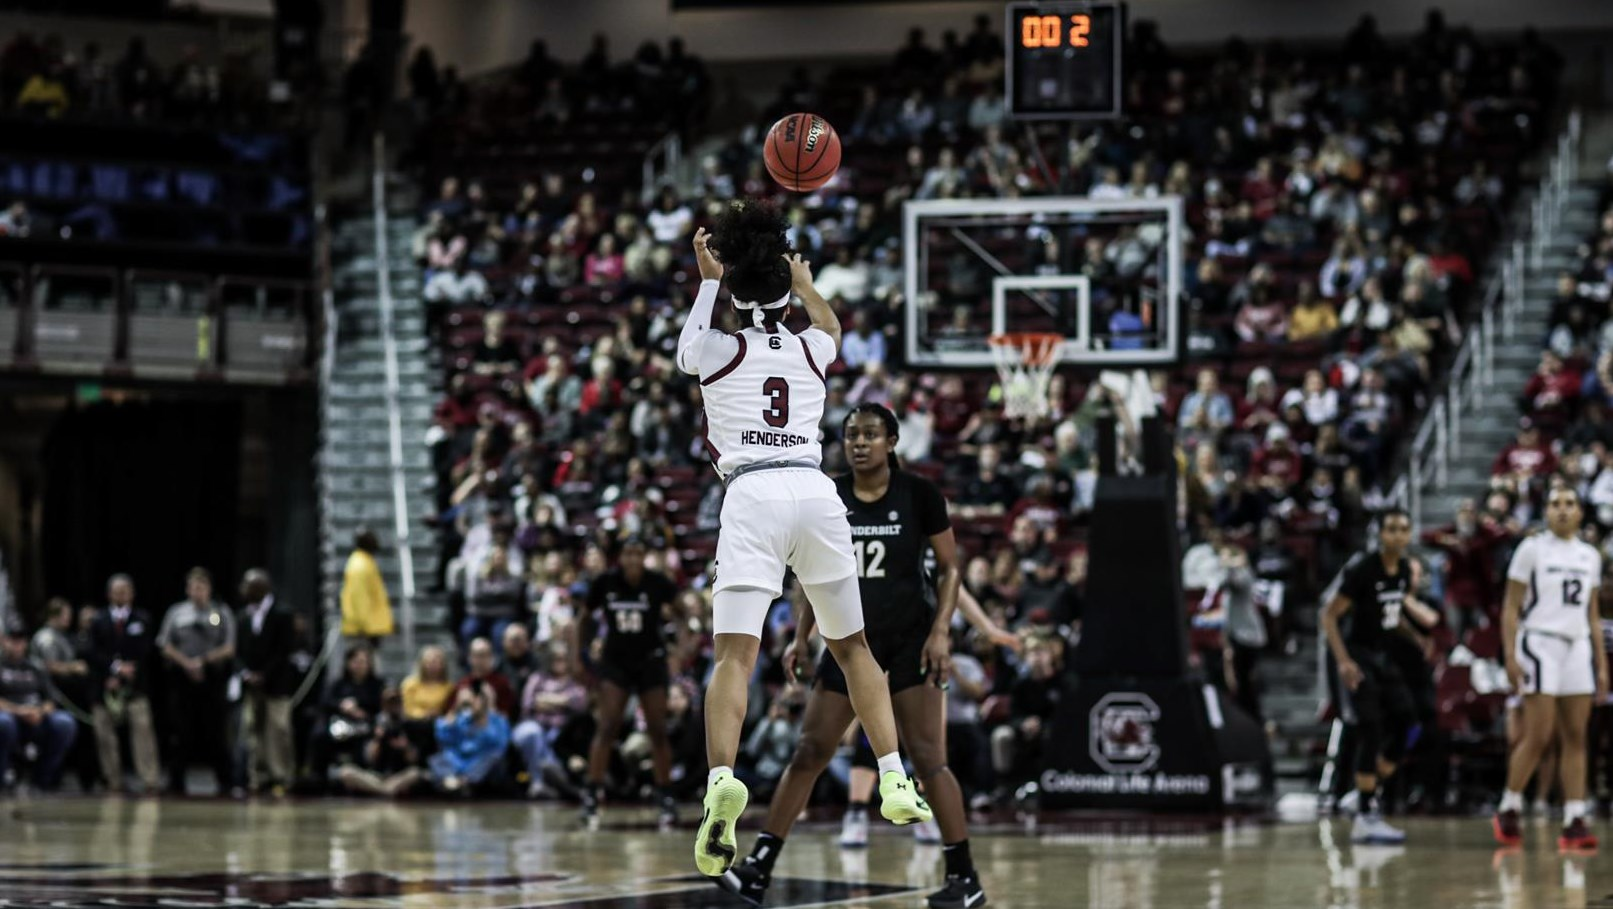 Gamecocks Ride Bench Wave Past Commodores